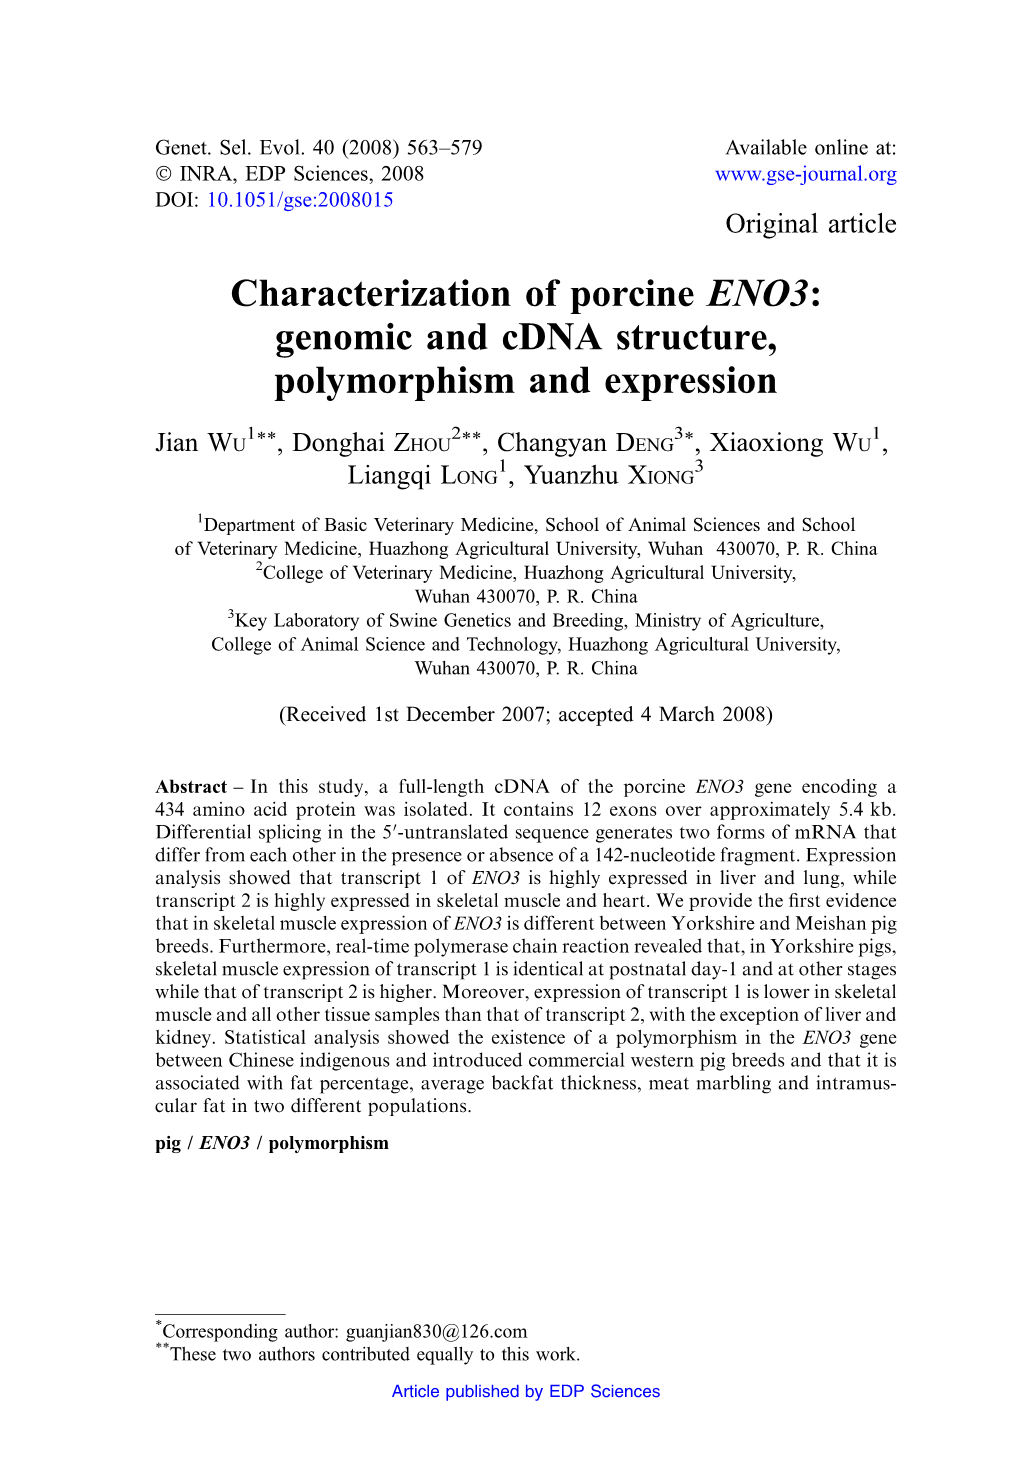 Characterization of Porcine ENO3: Genomic and Cdna Structure, Polymorphism and Expression